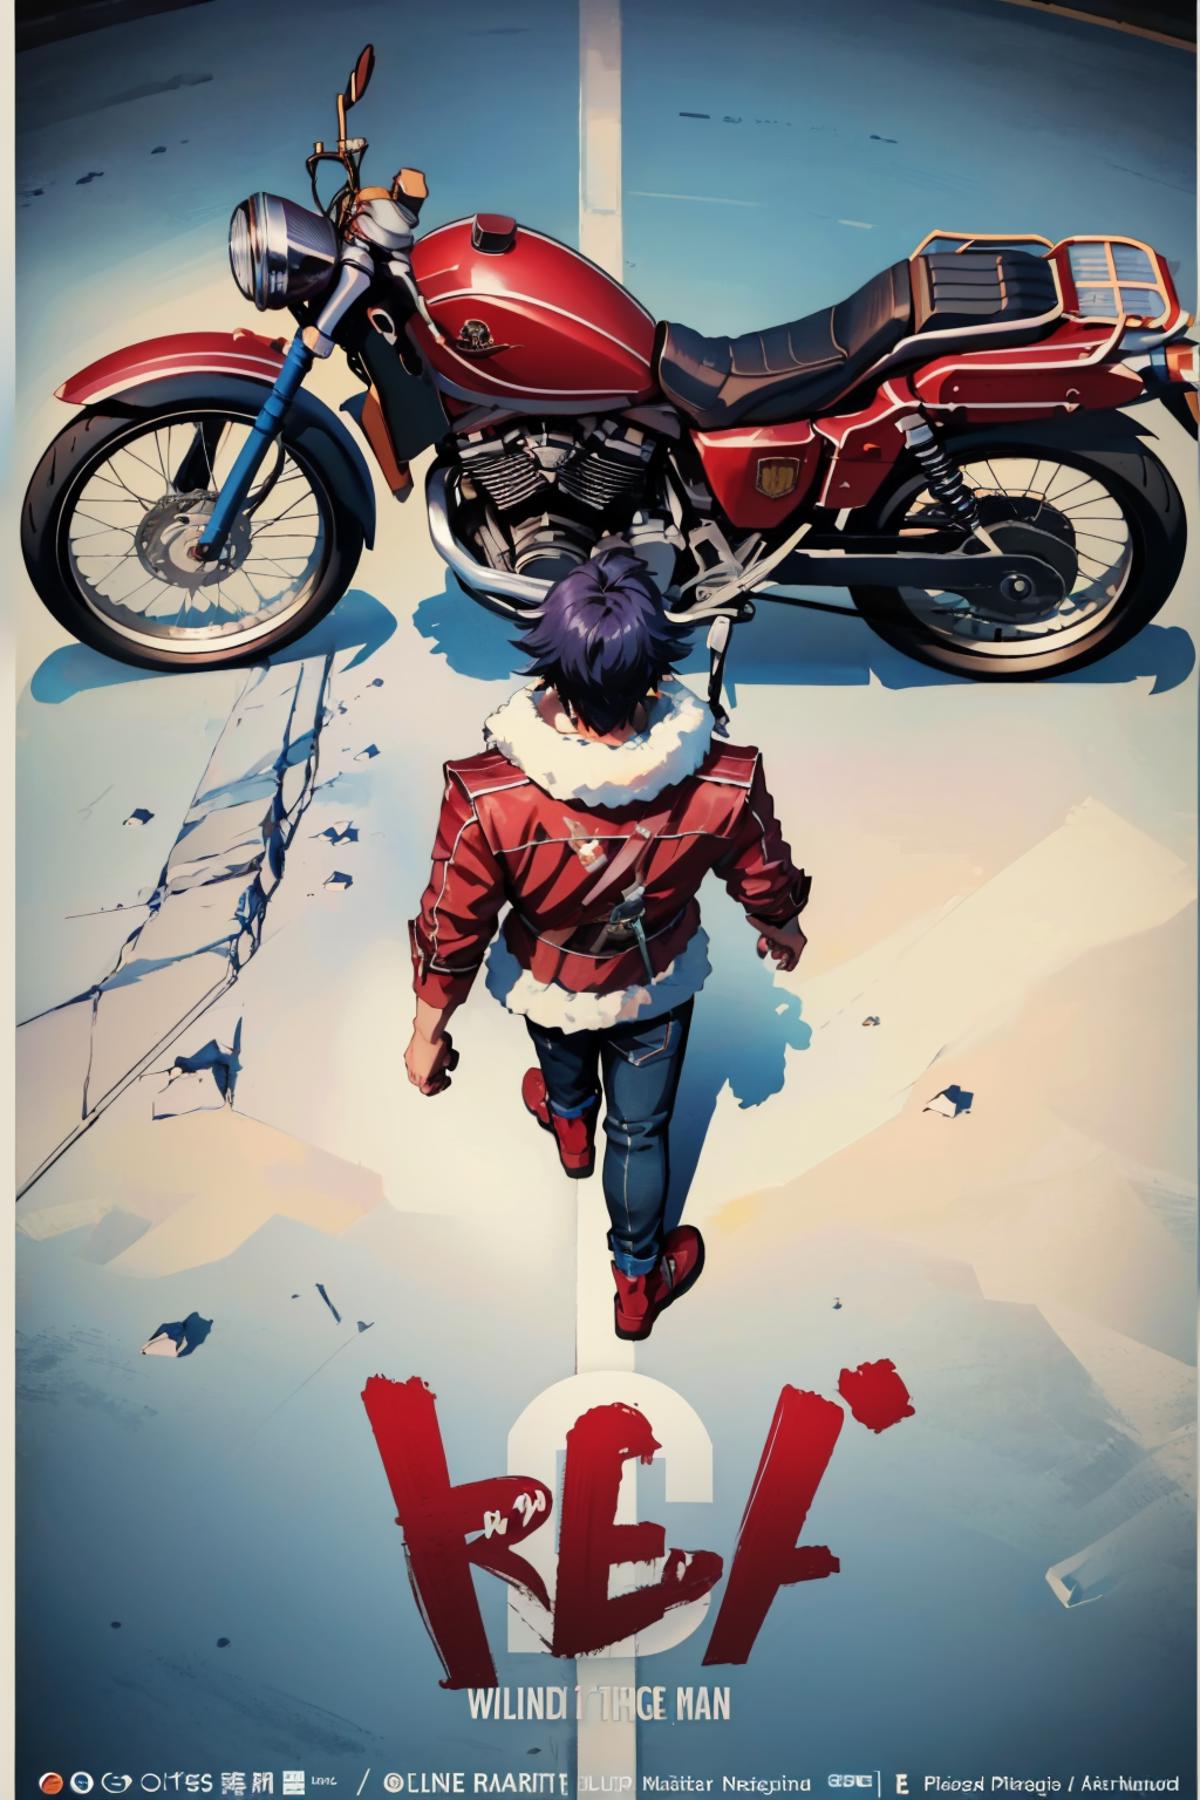 Akira Poster | Concept image by justTNP